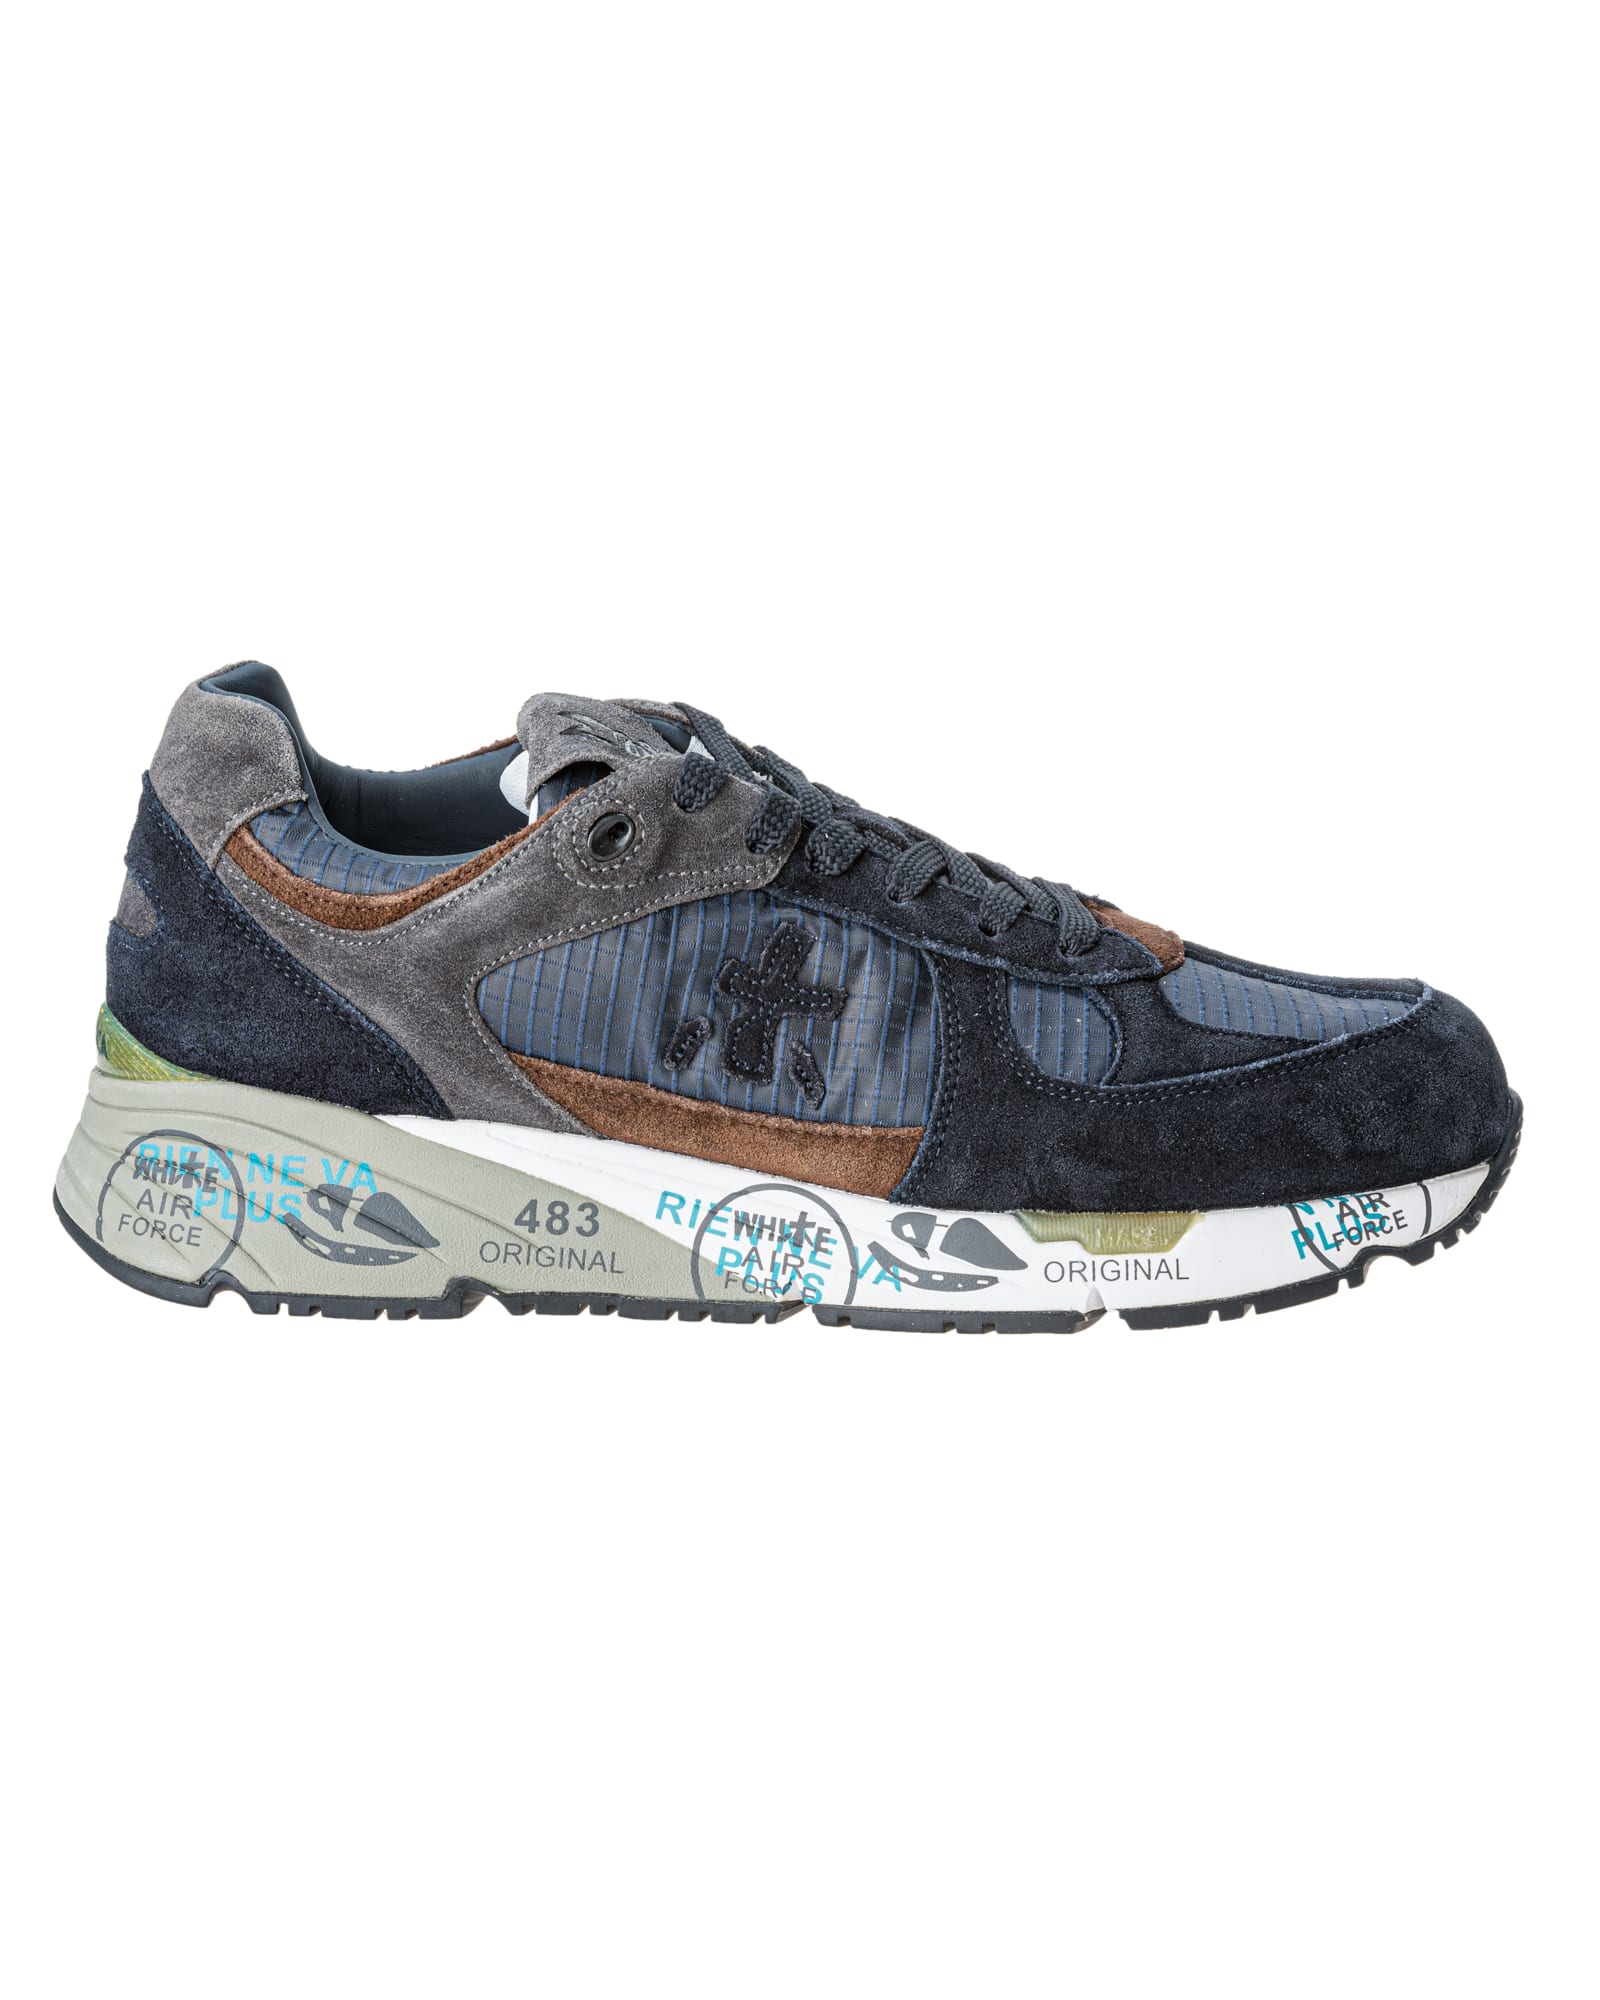 Premiata Sneakers Mase is a mix of technical materials and high quality leathers